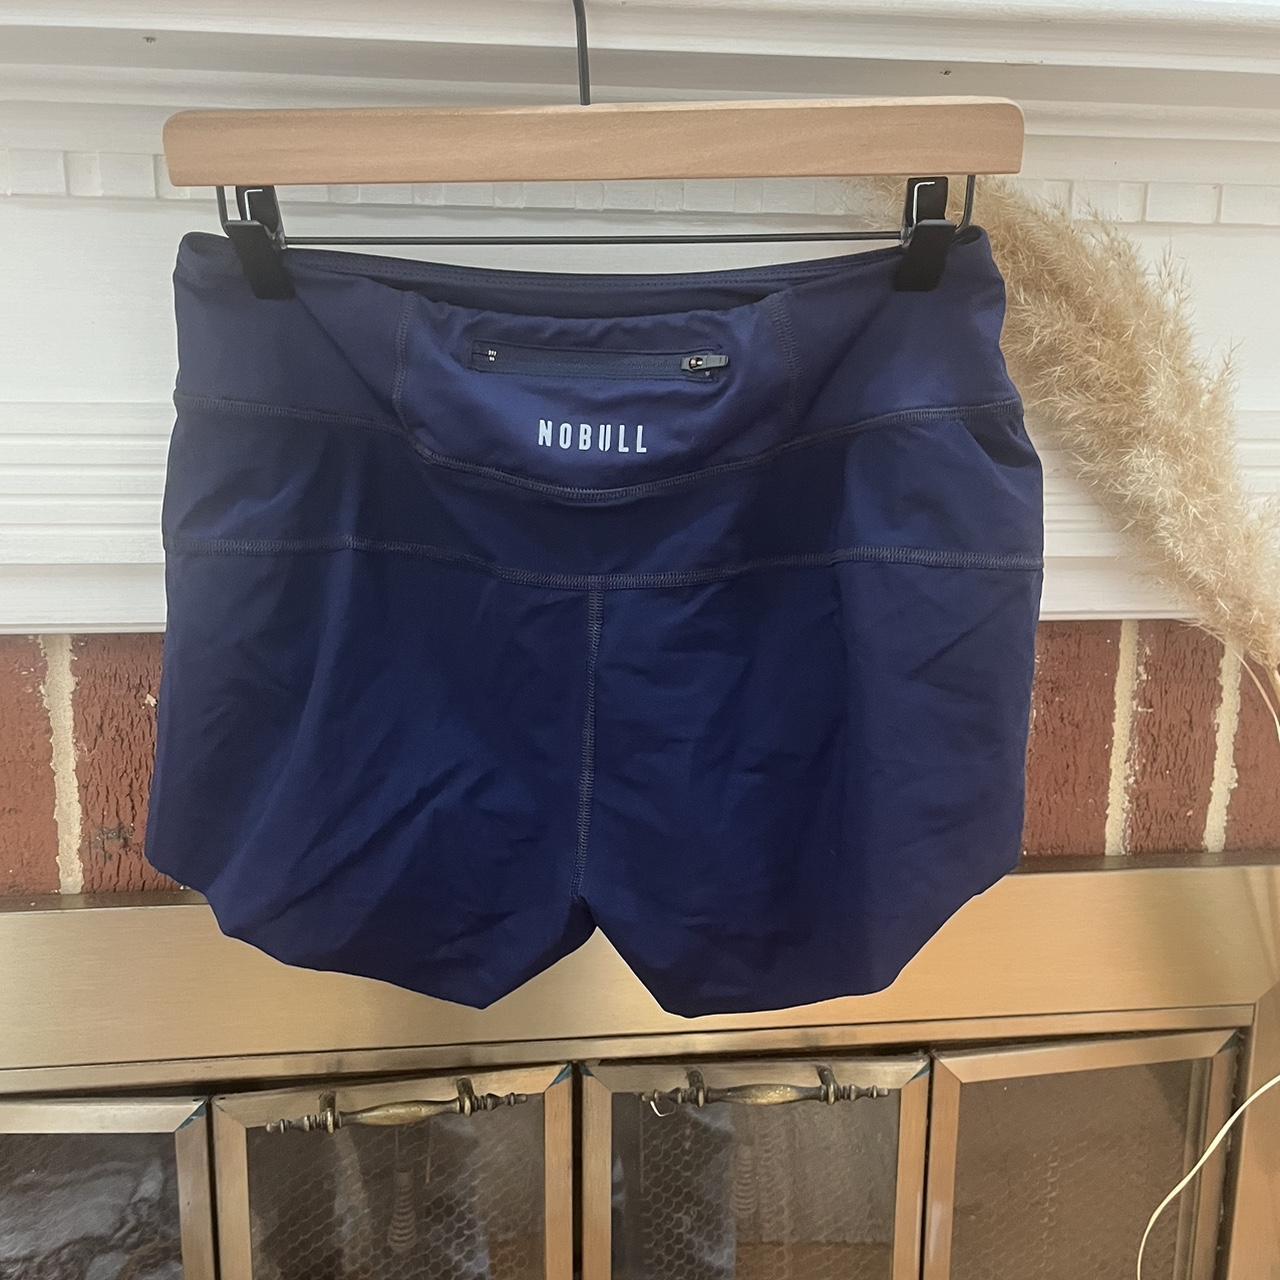 Never worn NOBULL shorts. Too short for me. They - Depop